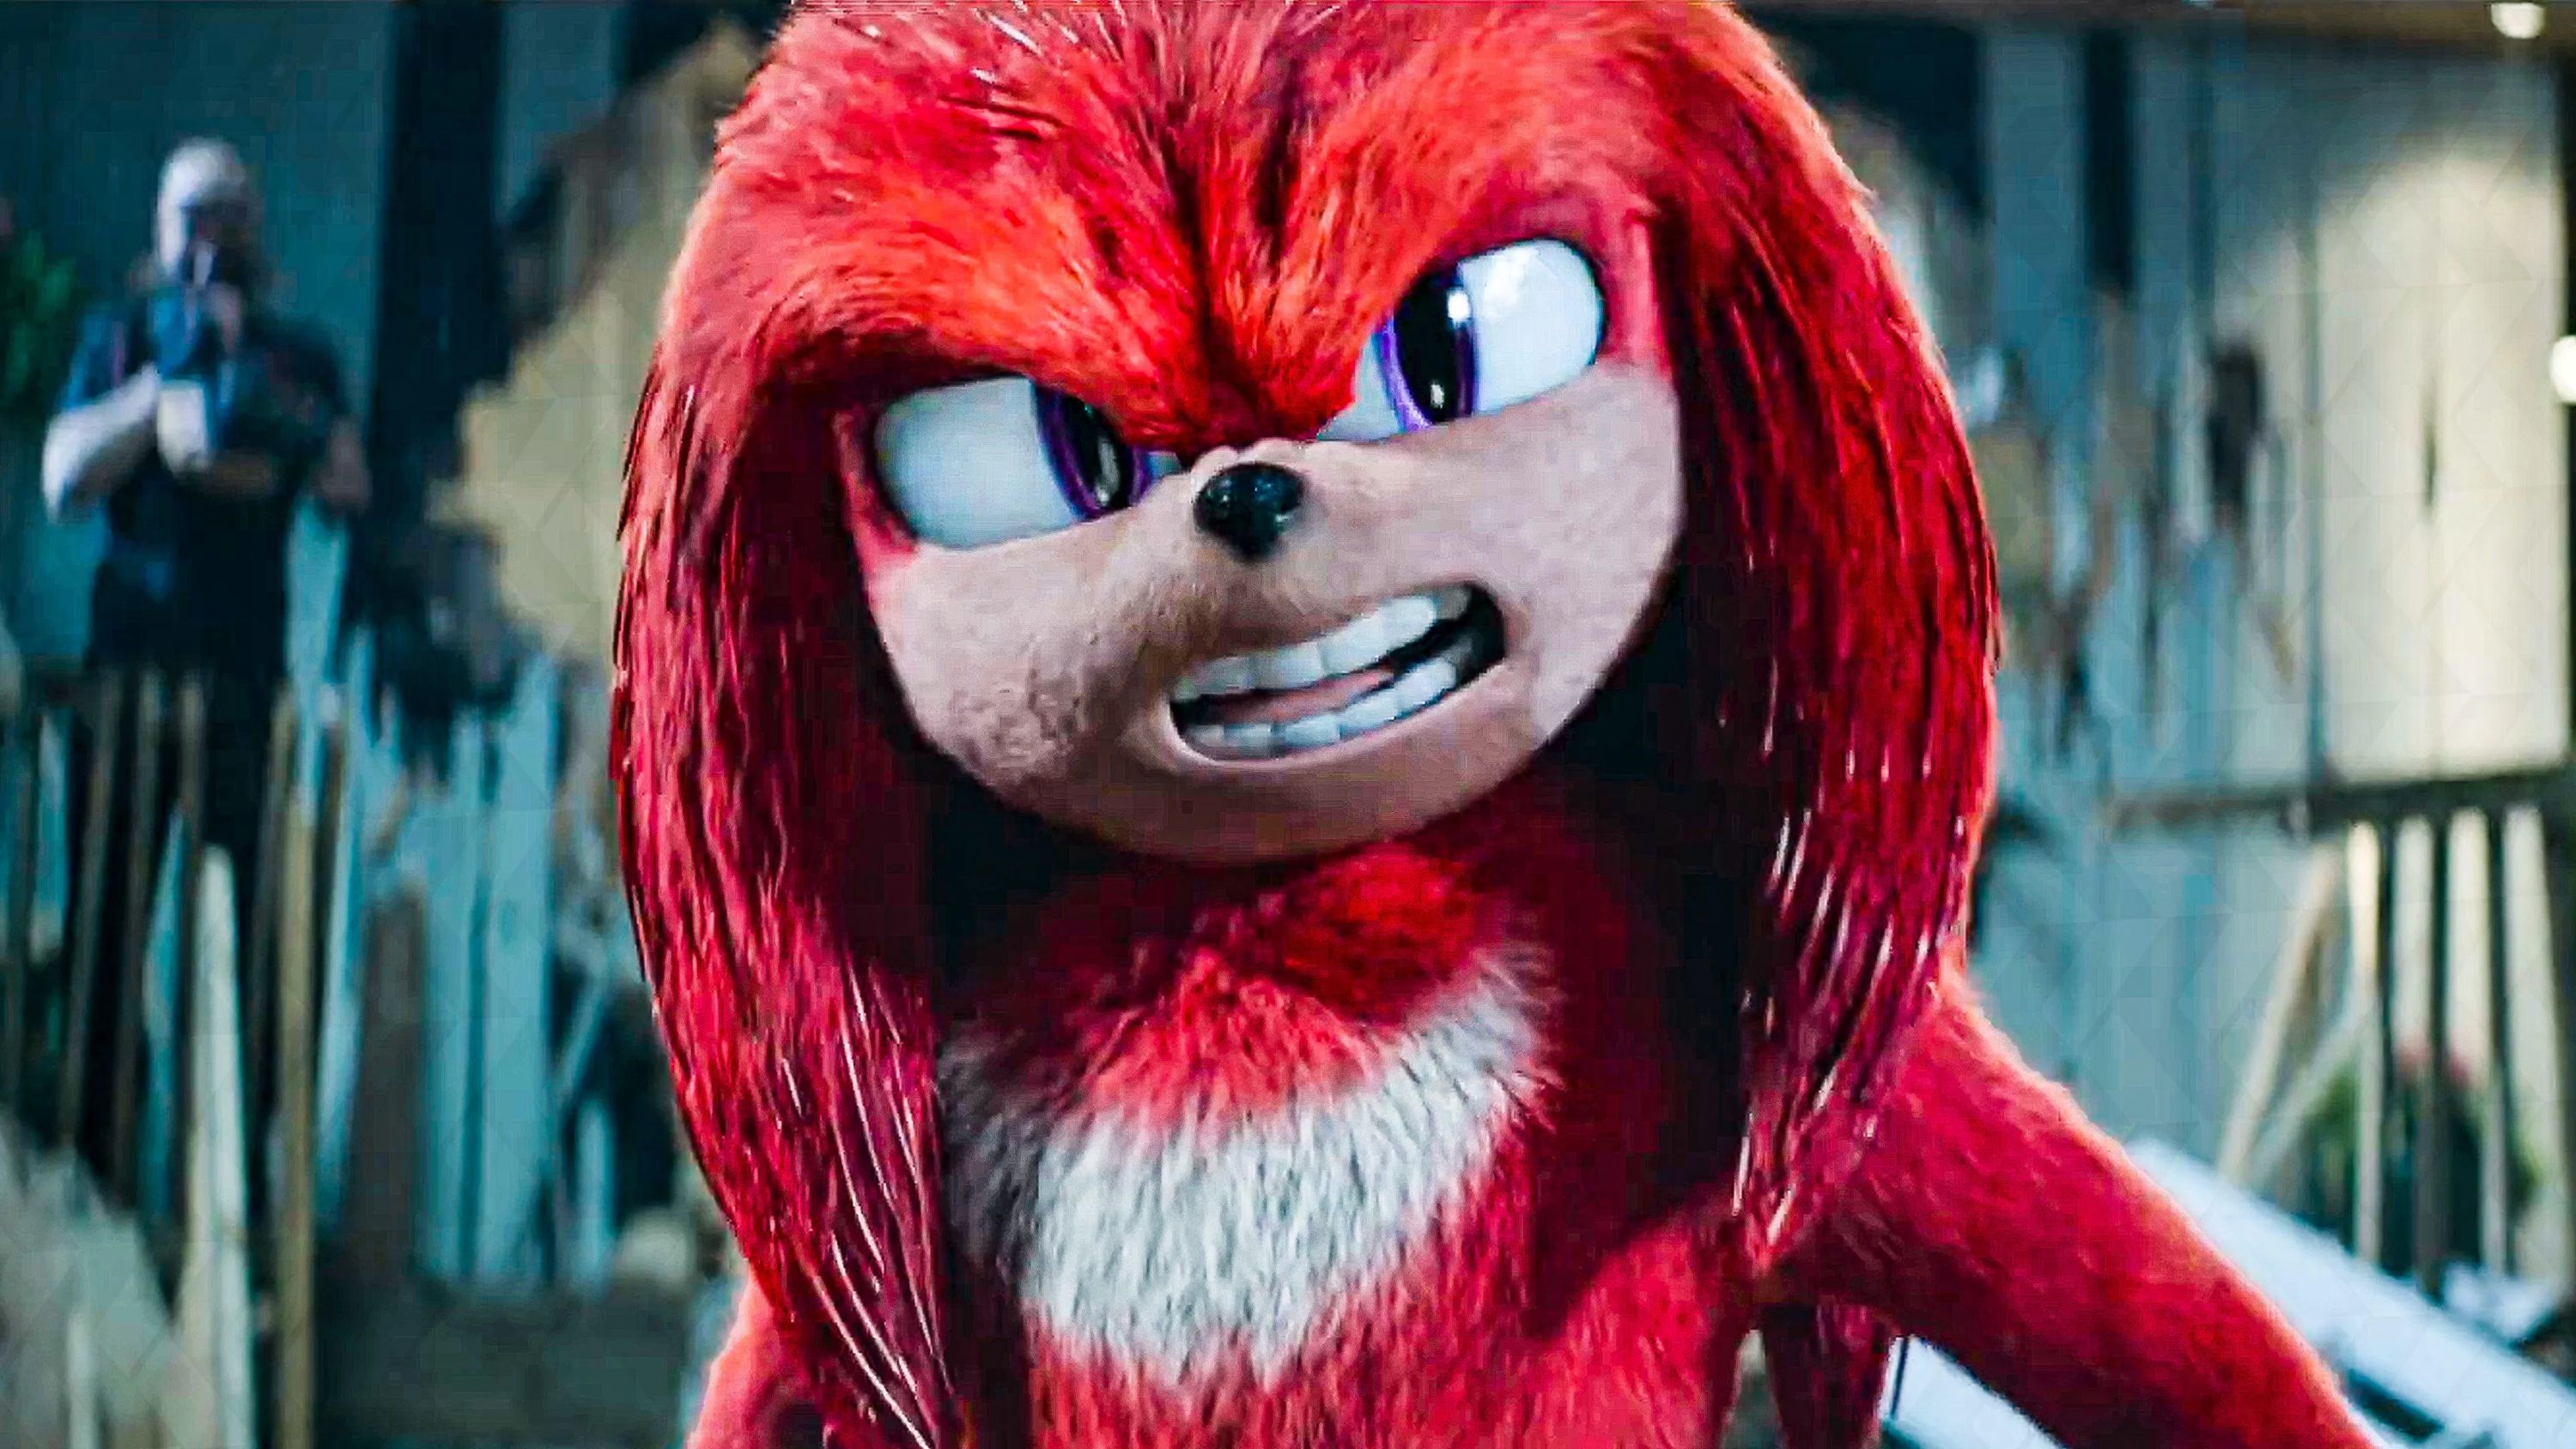 Knuckles Prominent New Additions to the Sonic Series Movie & Show